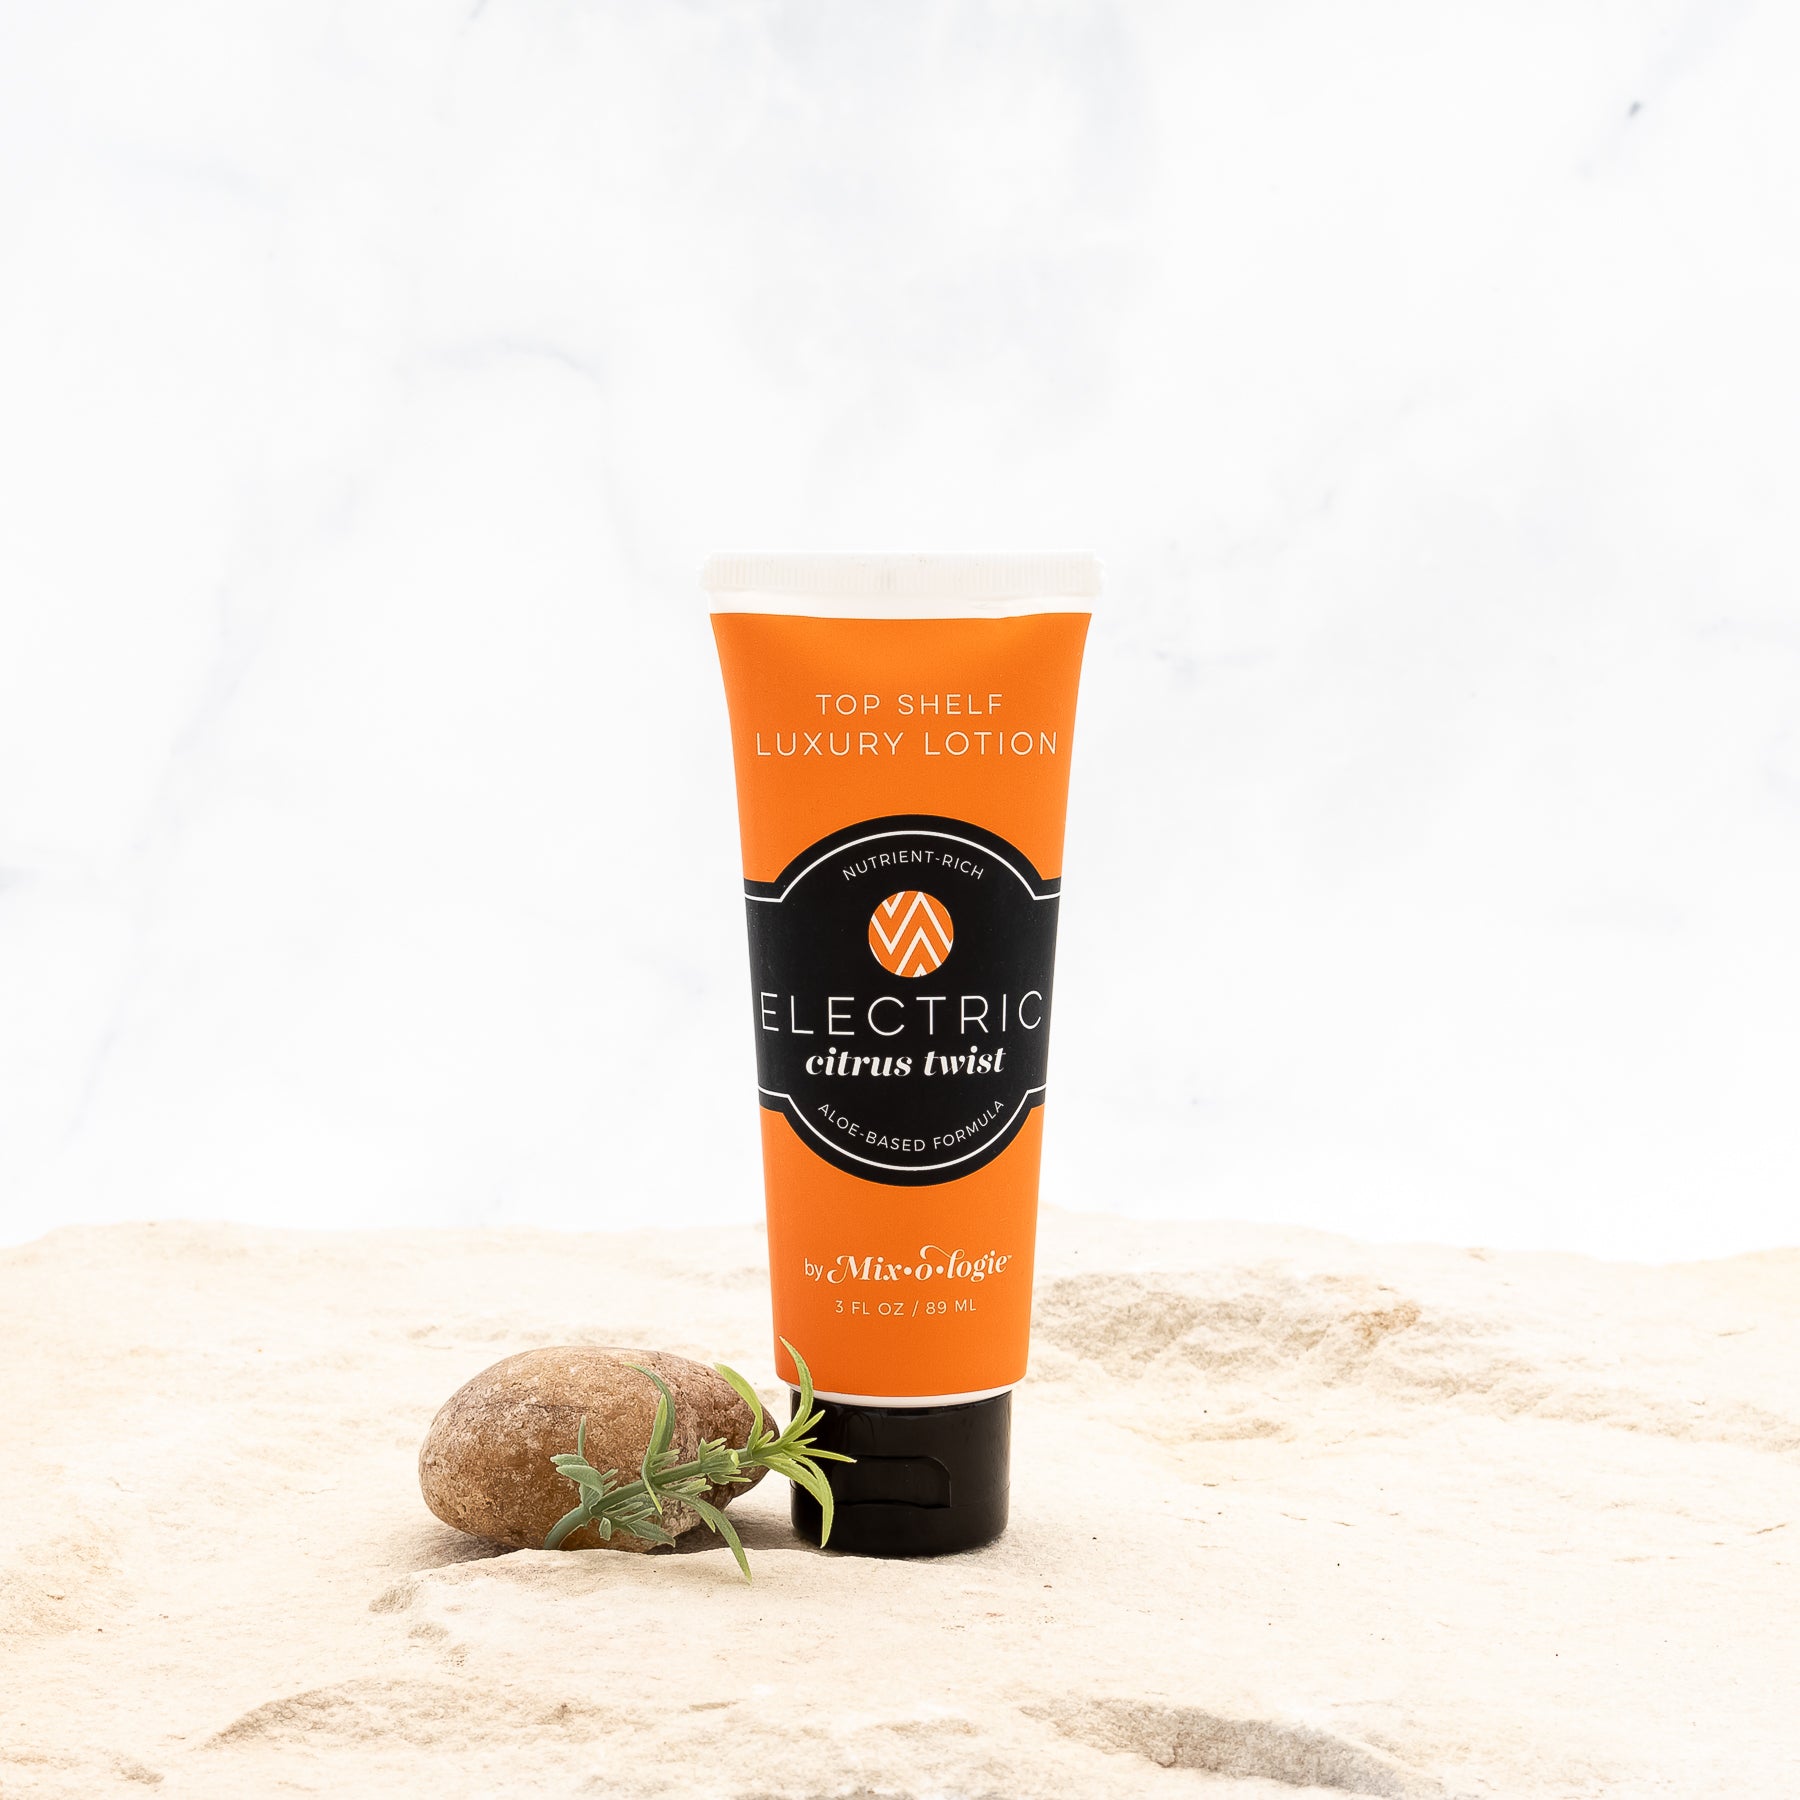 Electric (Citrus Twist) Top Shelf Lotion in orange tube with black lid and label. Nutrient rich, aloe-based formula, tube has 5 fl oz or 89 mL. Pictured with white background, sand, rocks, and greenery. 